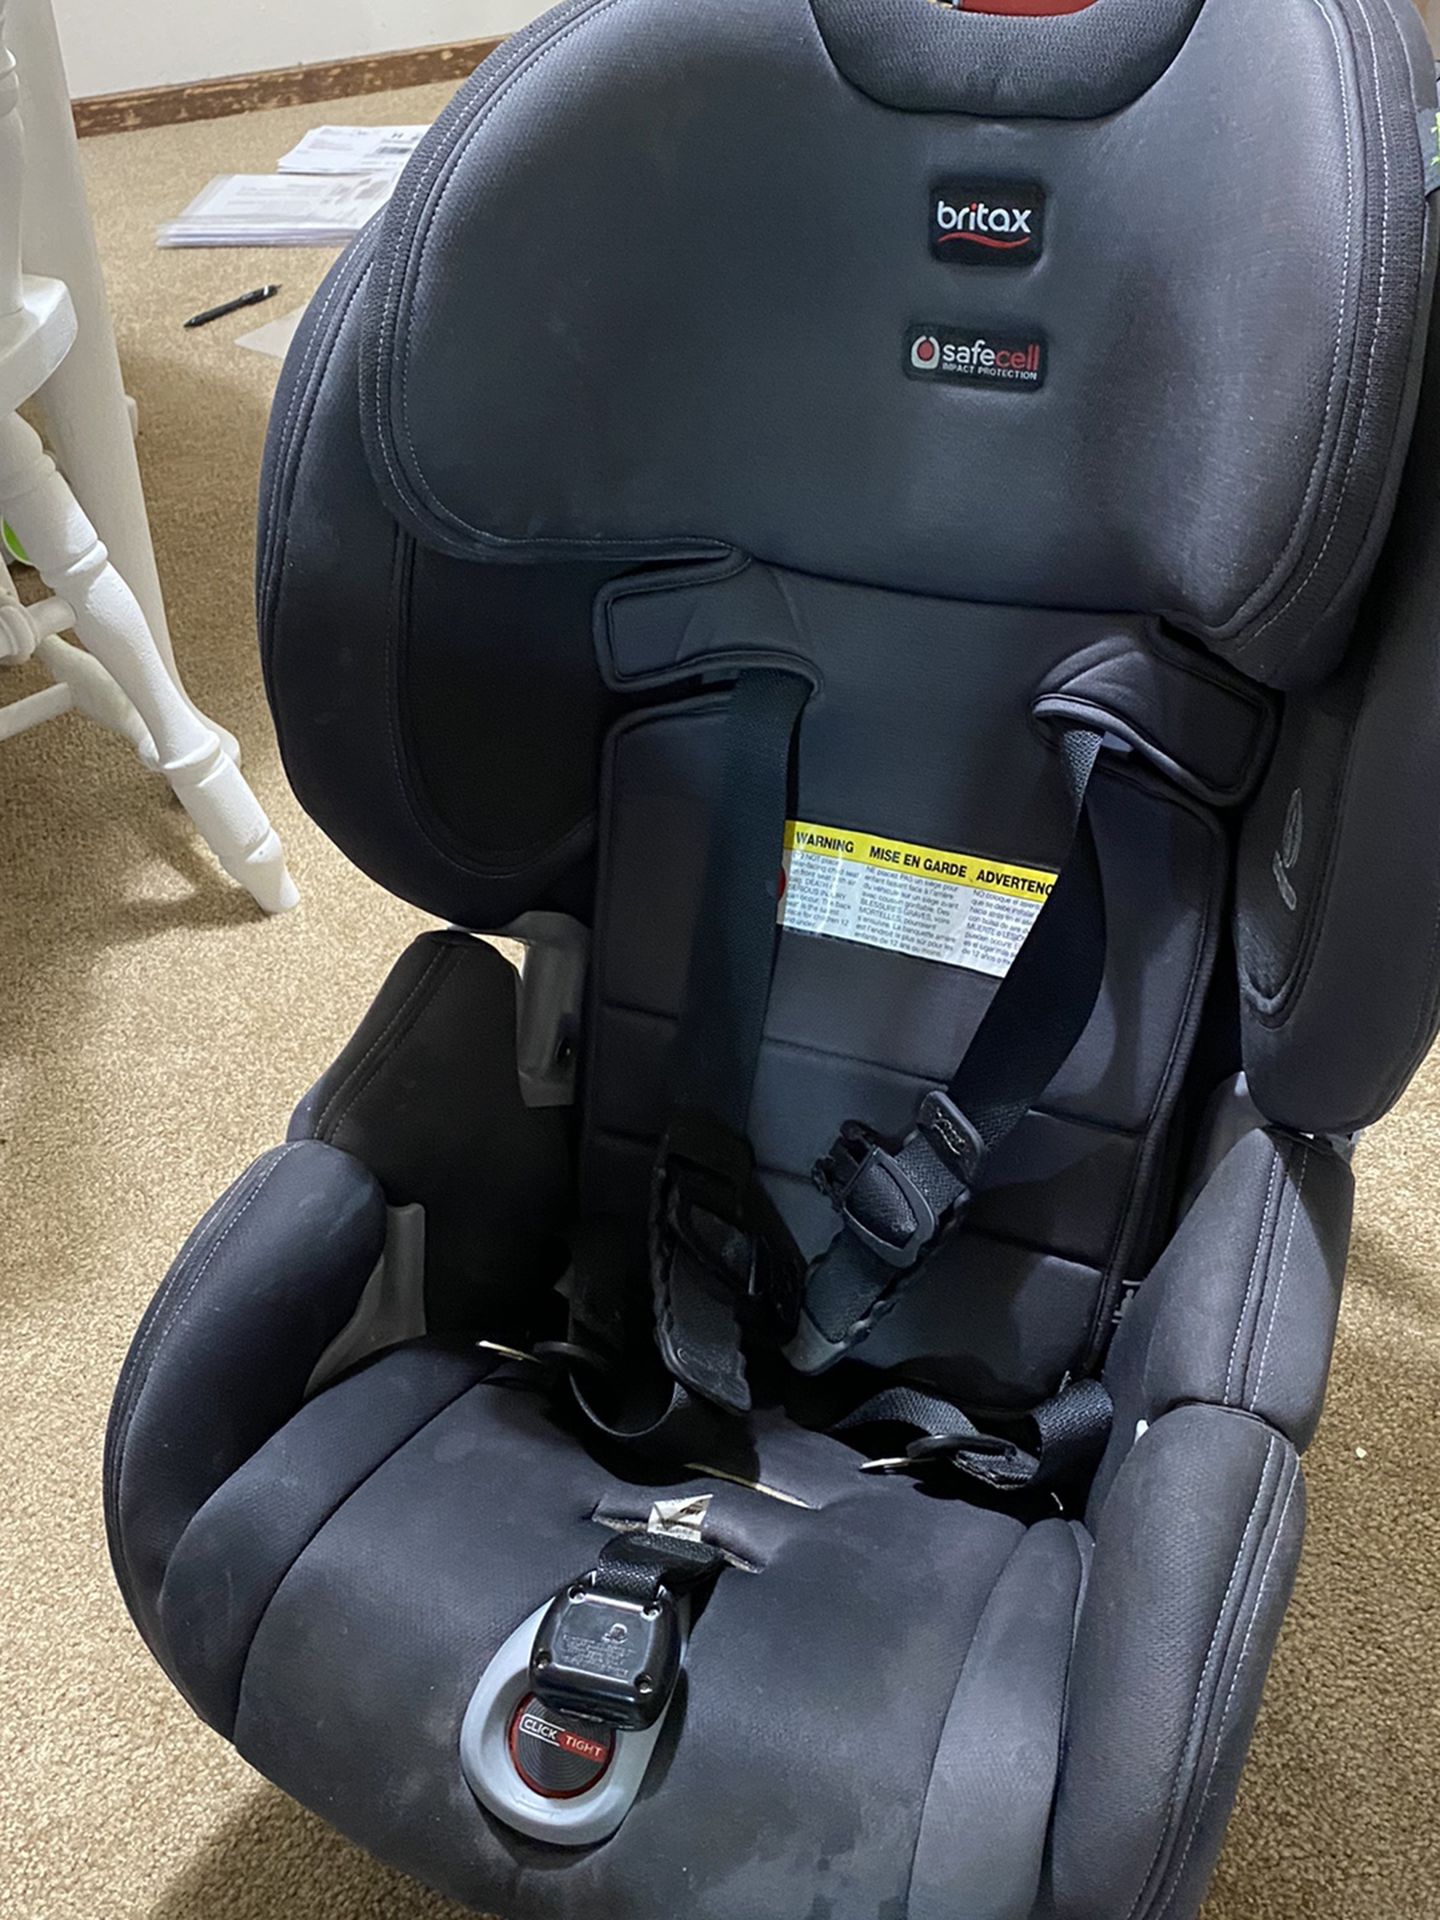 BriBRITAX Boulevard™ ClickTight Cool N Dry Collection Convertible Car Seat in Charcoal